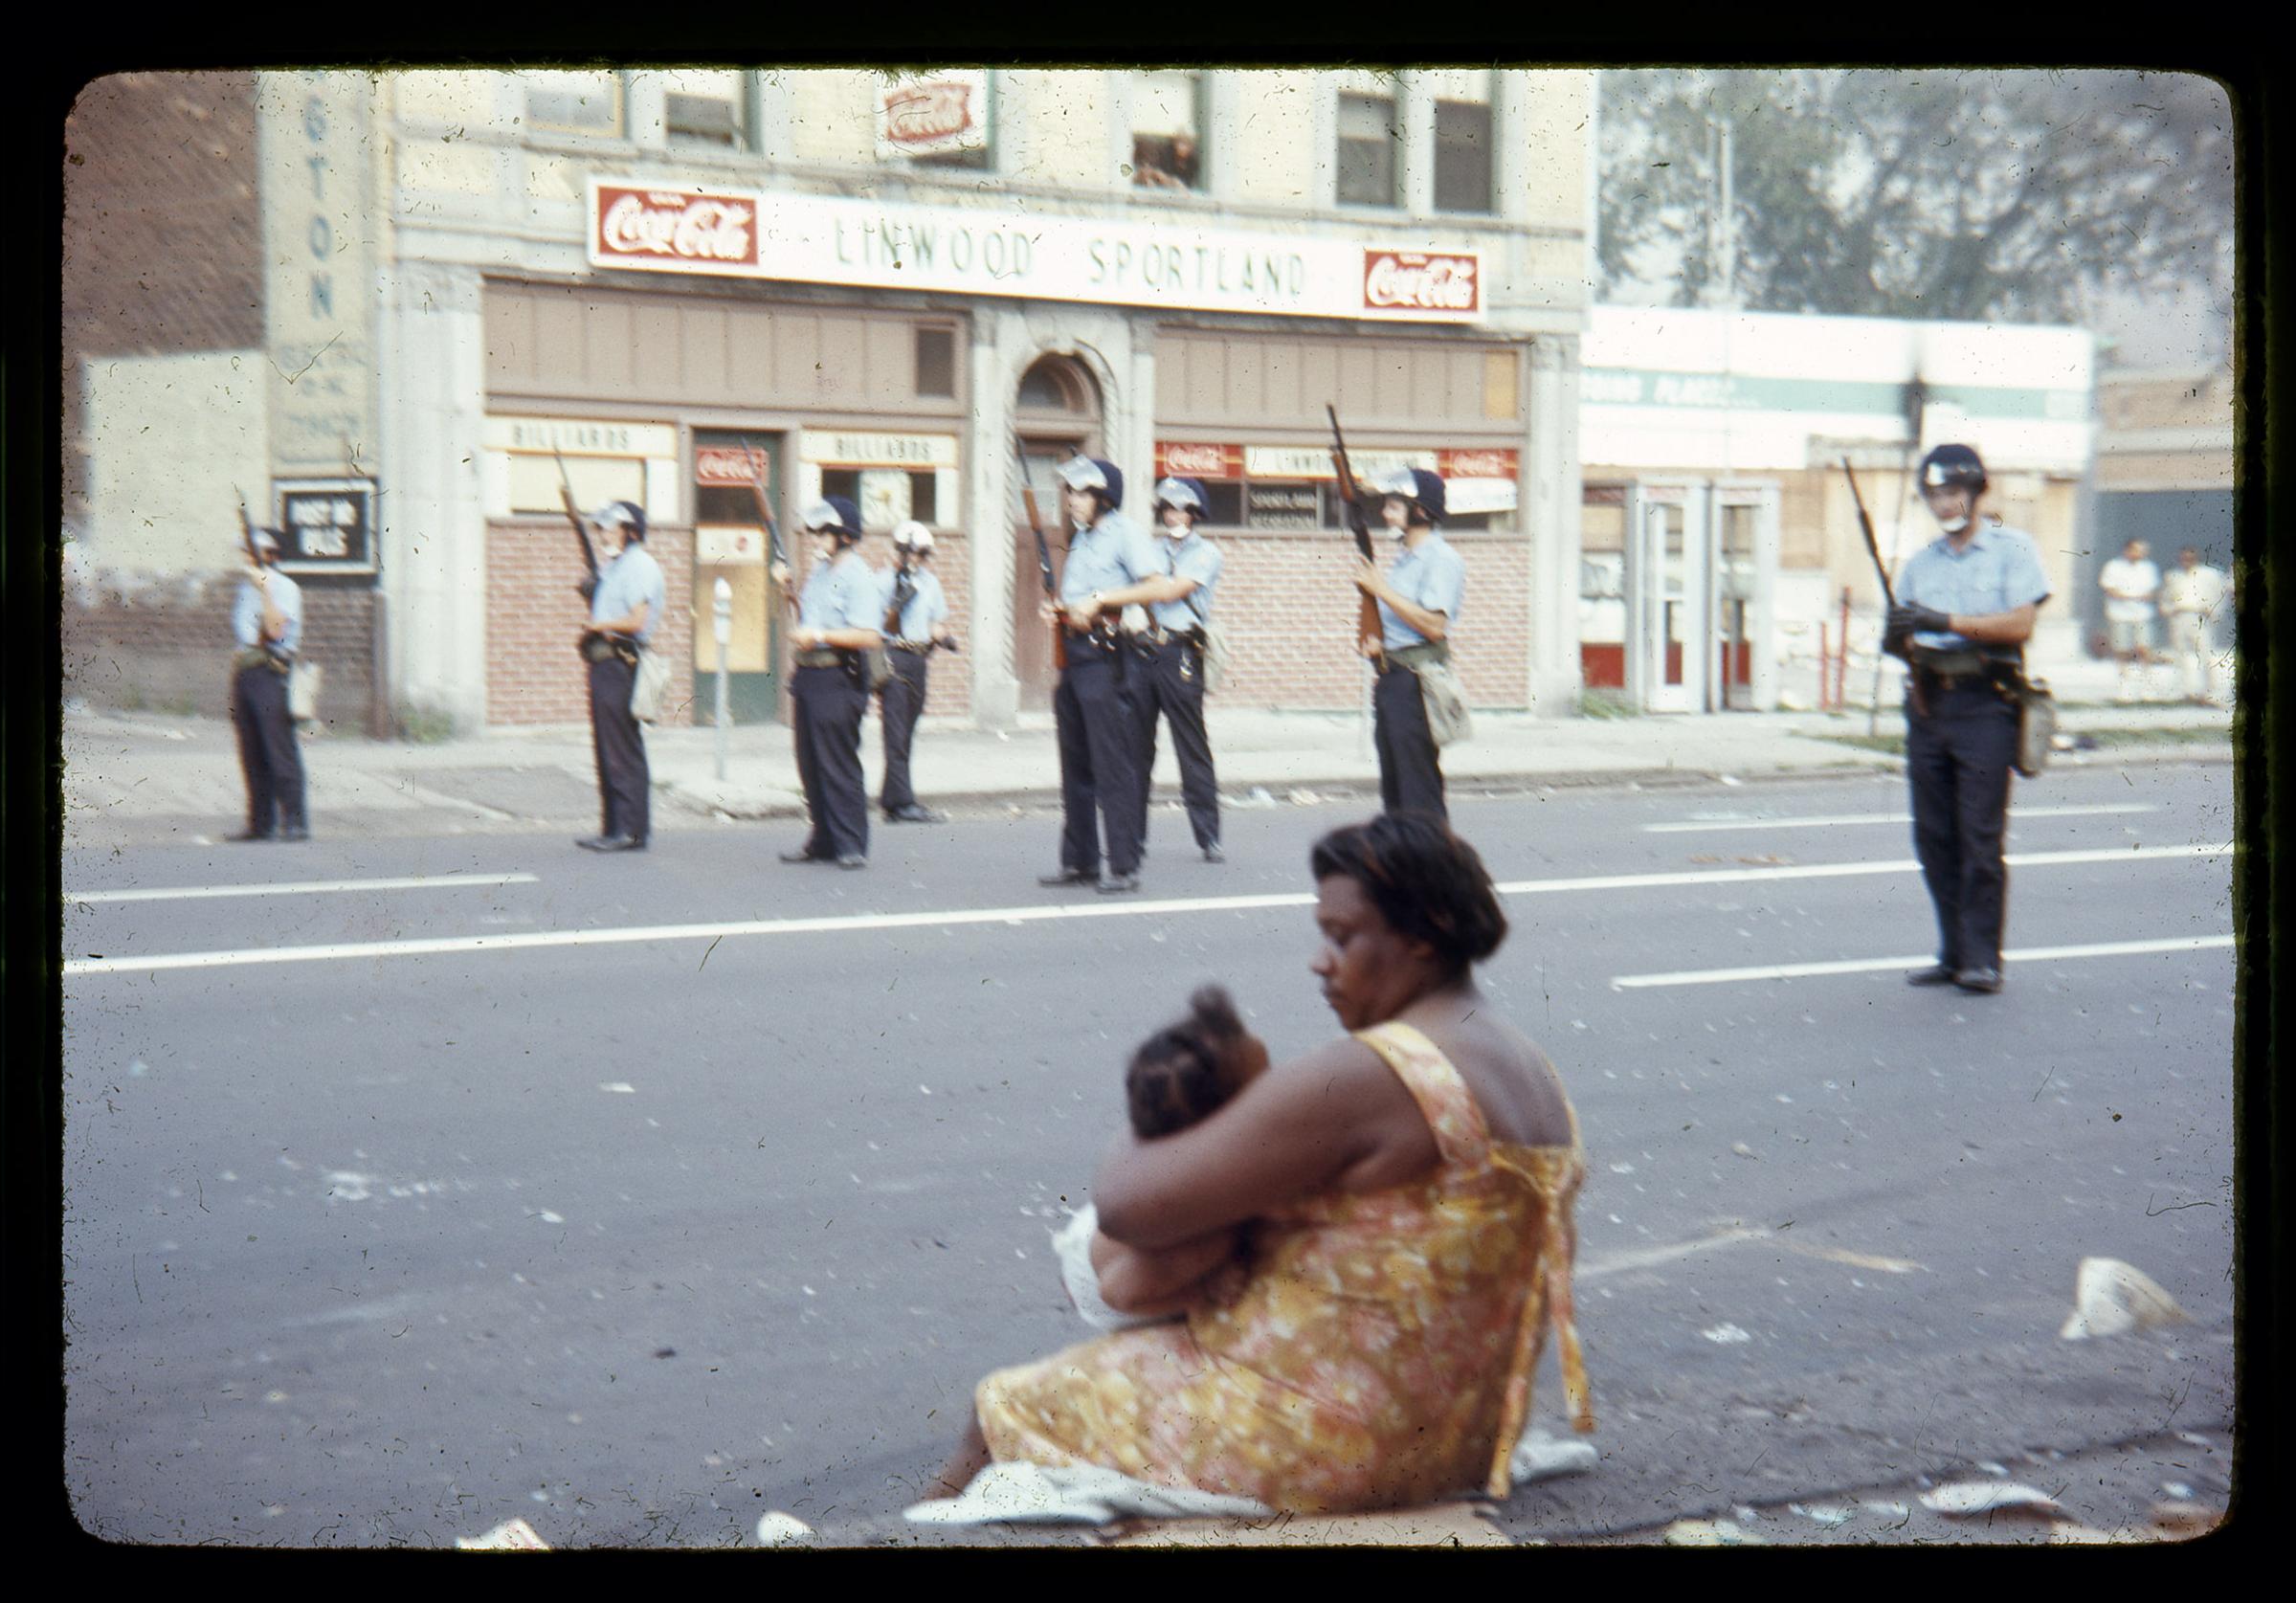 Several Detroit police officers clad in riot gear guard the streets of Detroit as a woman and child look on.